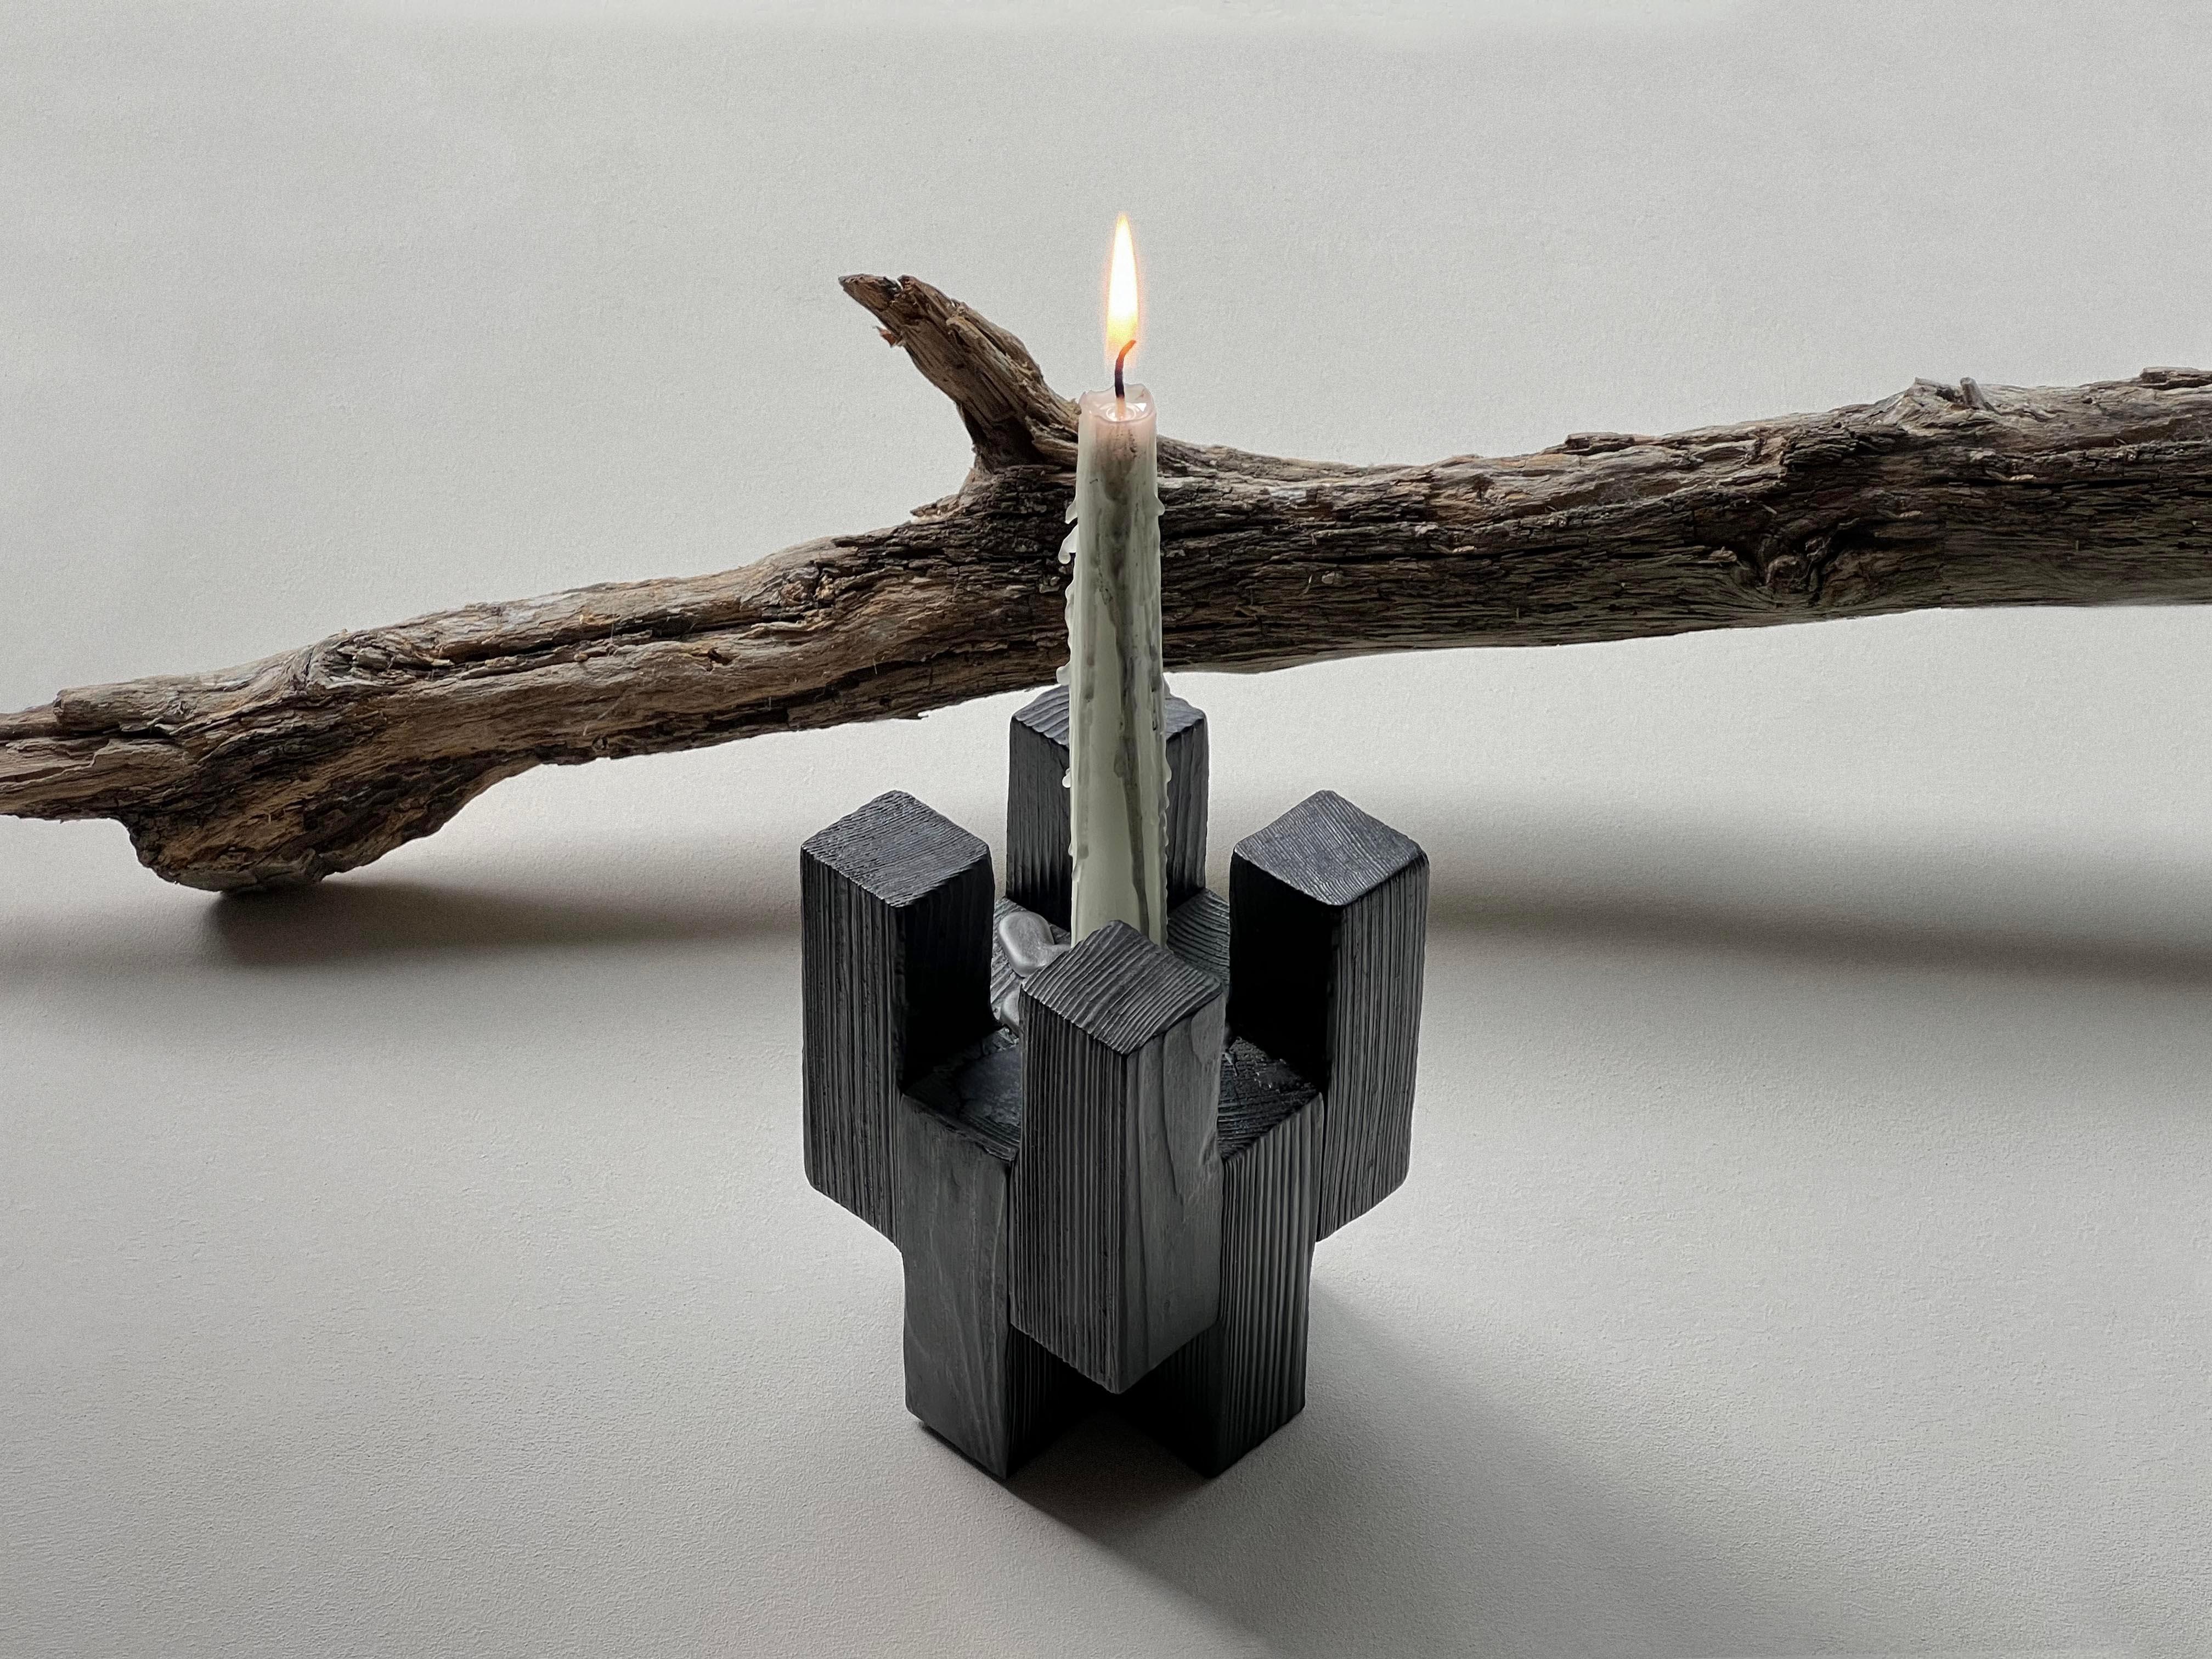 Brick Candle Holder by Nana Zaalishvili
Dimensions: D 9 x W 9 x H 13 cm.
Materials: Burnt and painted wood.

‘Brick’ is the first attempt by Idaaf Architects workshop to create a new building material. White the process of selecting its textures is